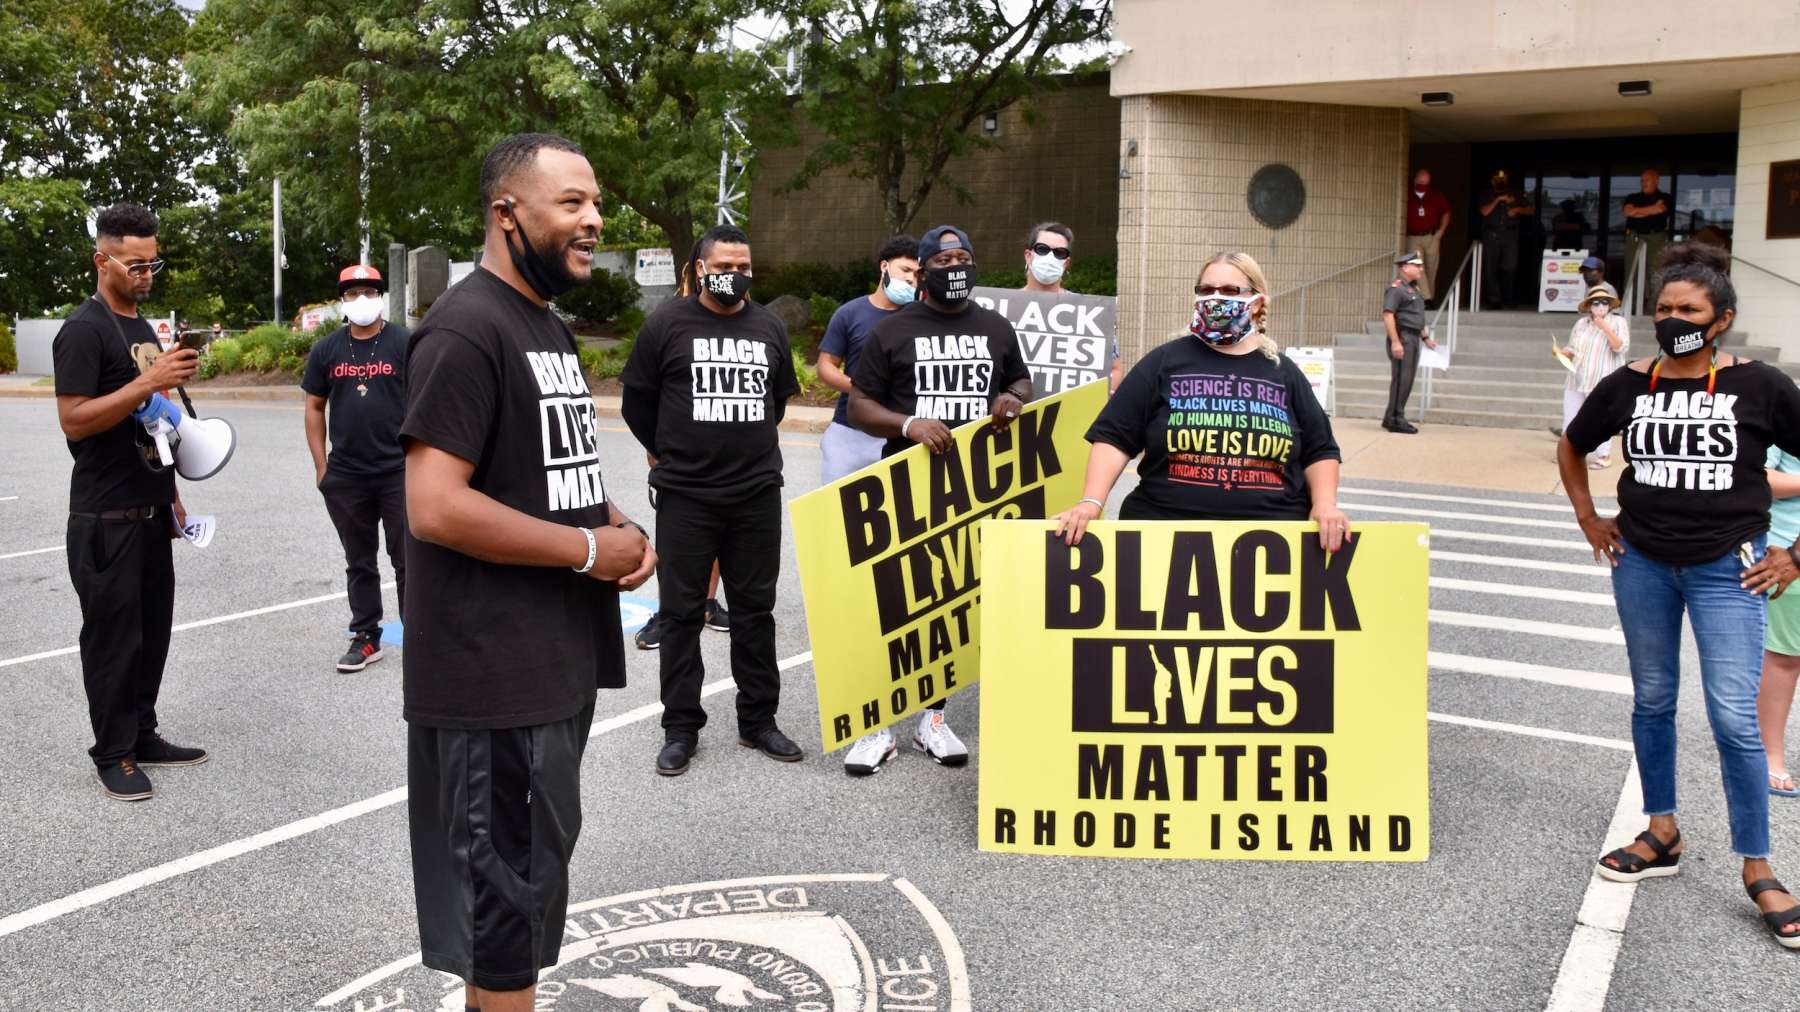 Black Lives Matter RI protests outside East Providence Police Department